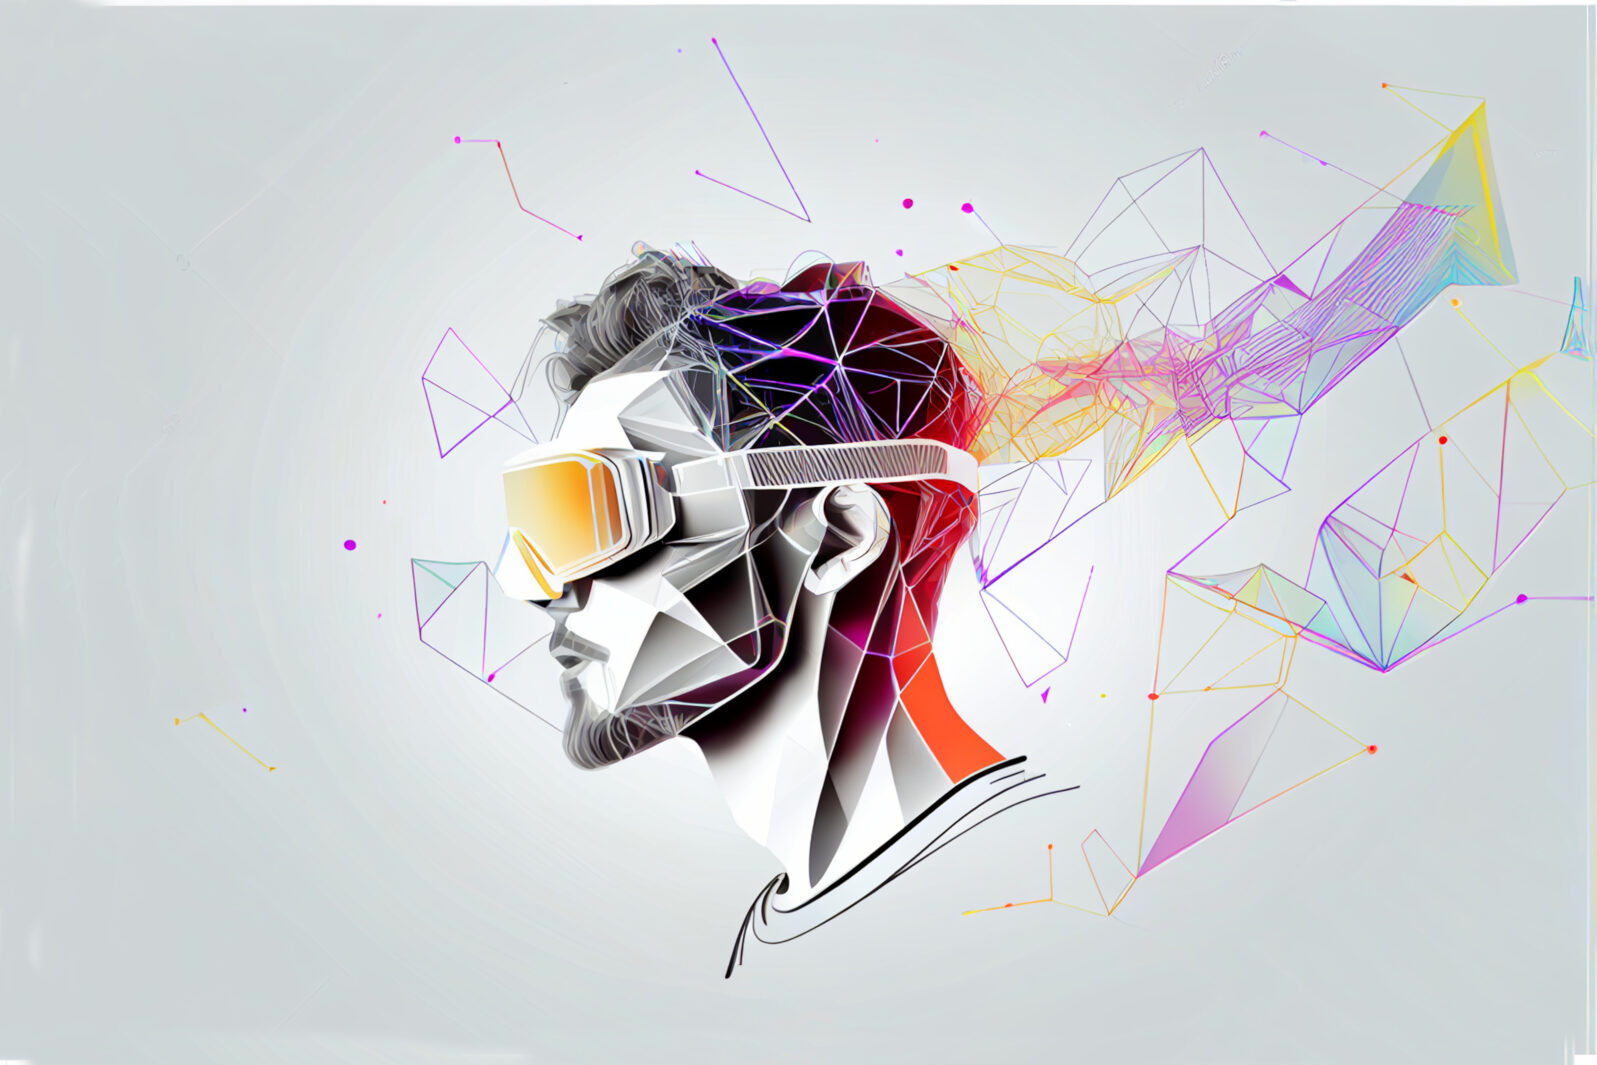 VR virtual reality headset goggles worn by man 3D illustration with colorful abstract art showing creativity, fun, metaverse and more, with a white background.